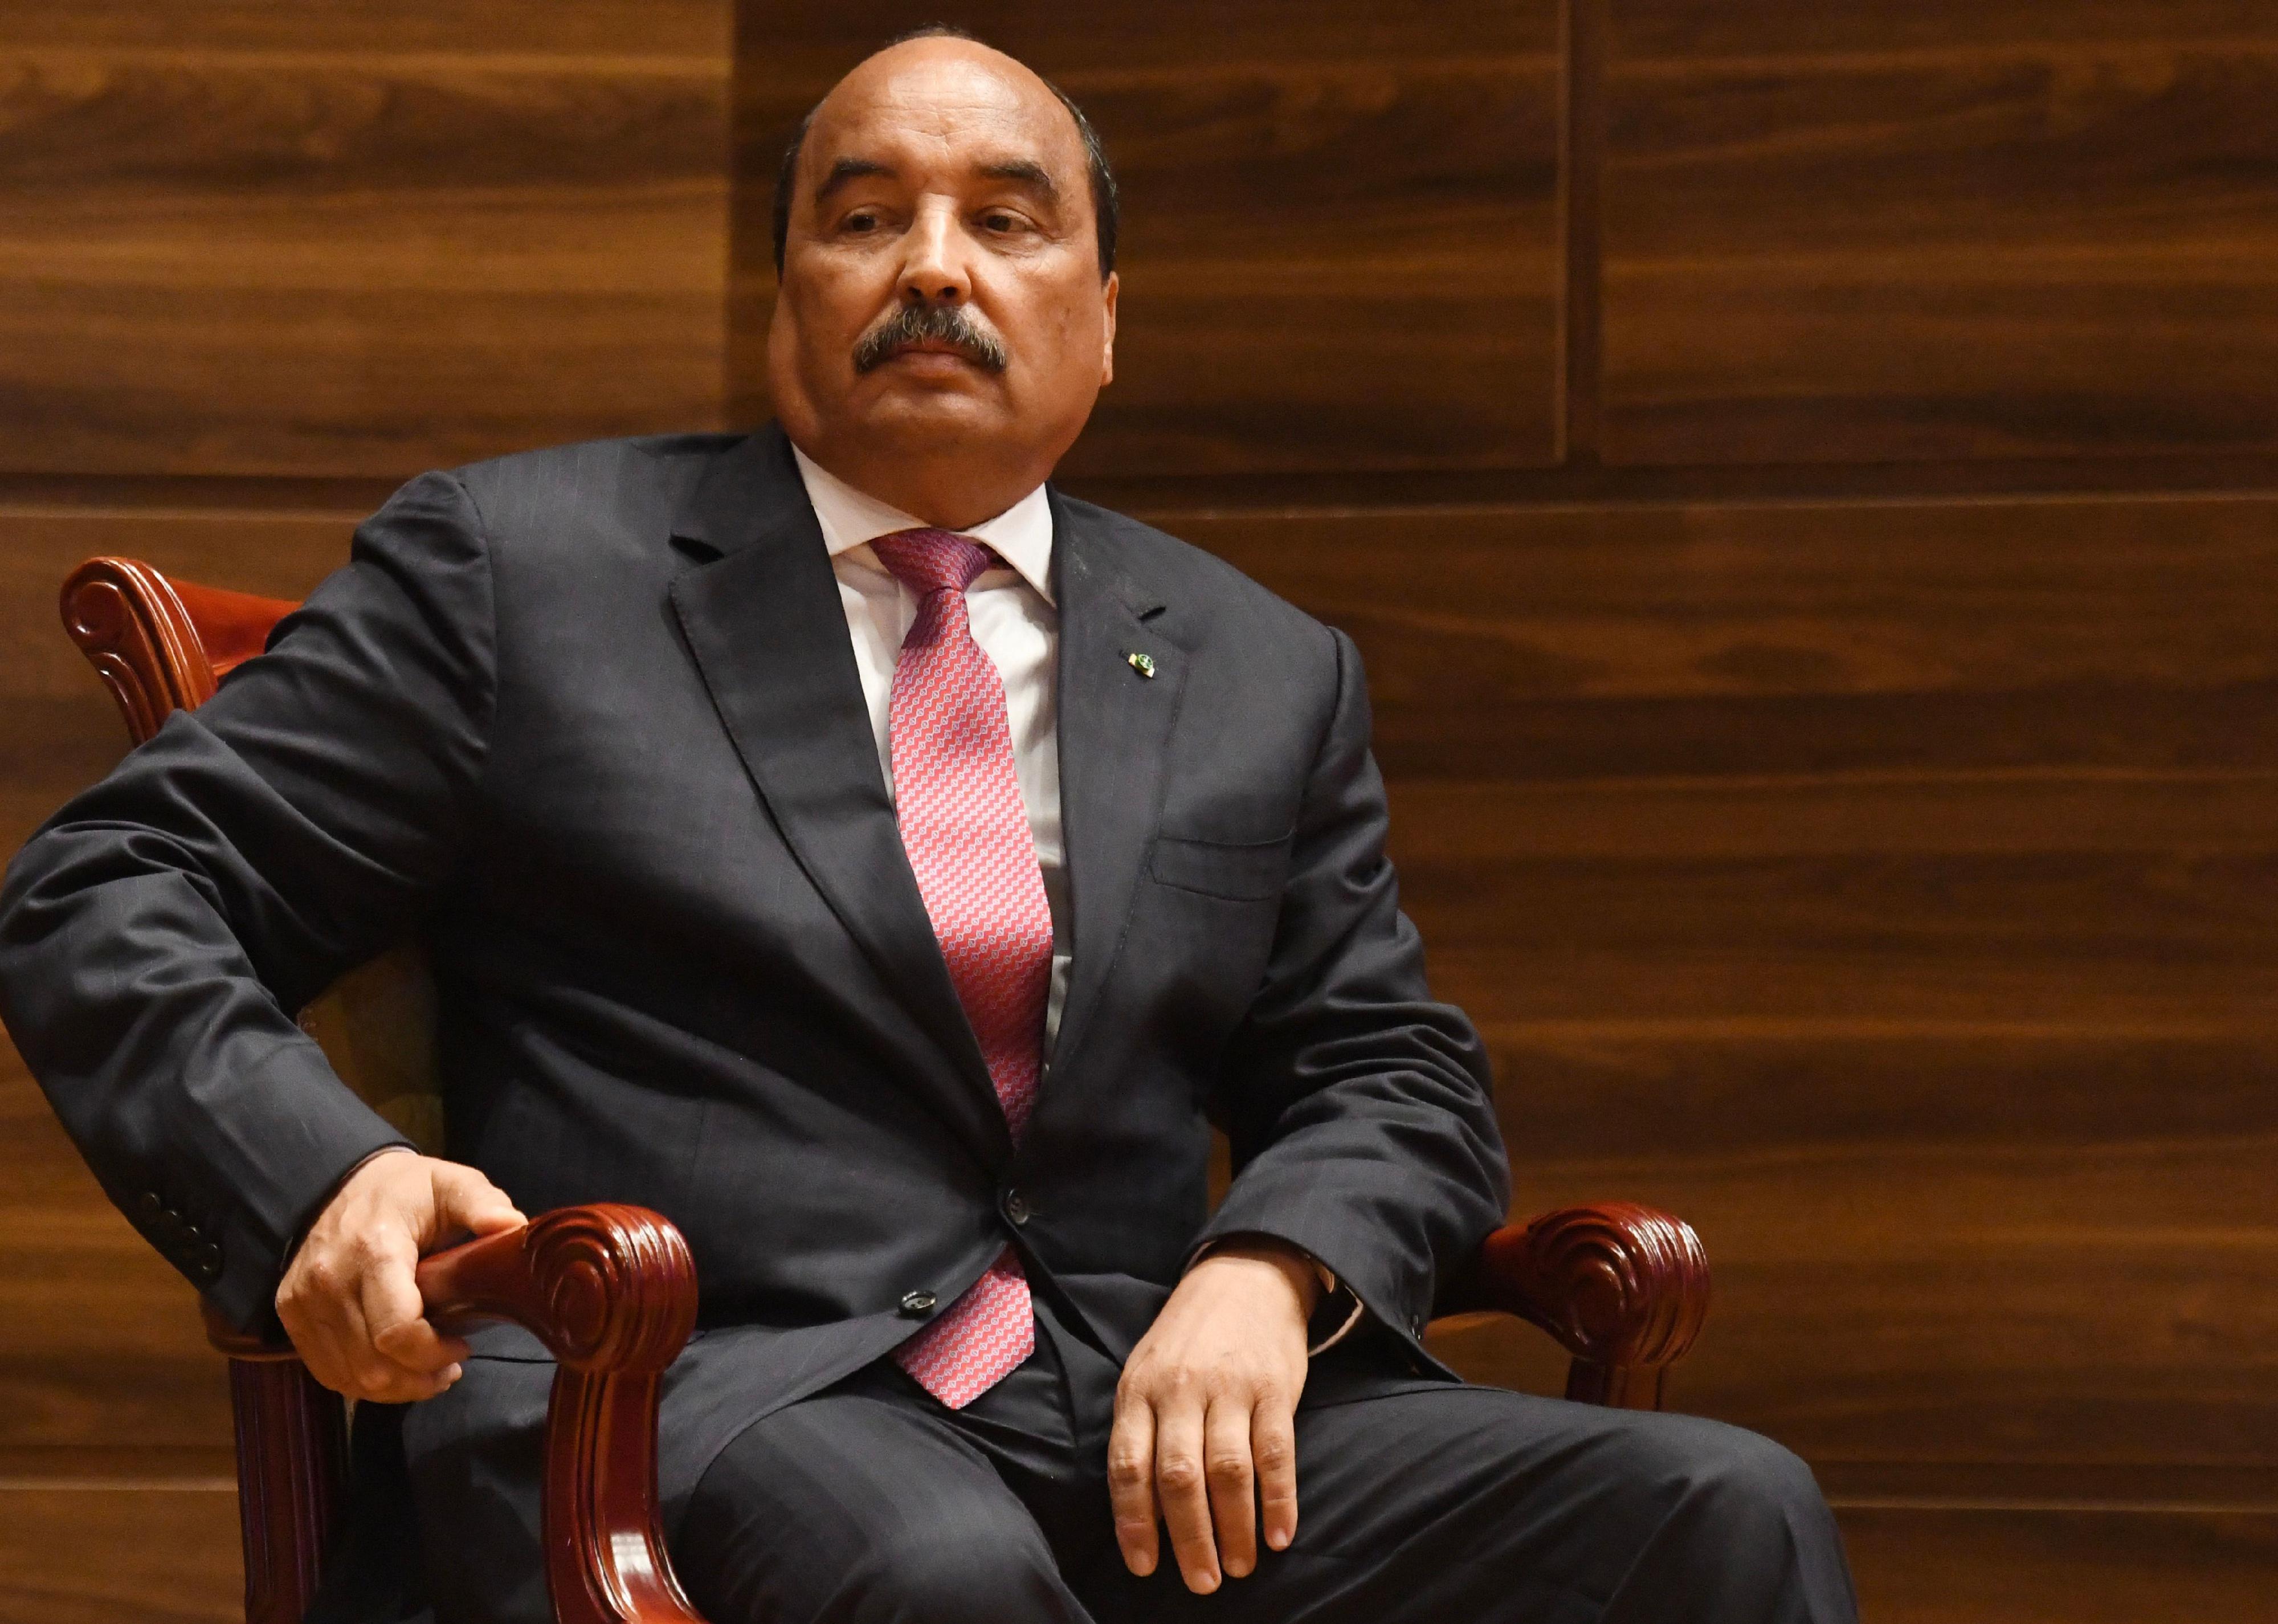 Mohamed Ould Abdel Aziz looks on during the swearing-in ceremony of the newly-elected Mauritania's President